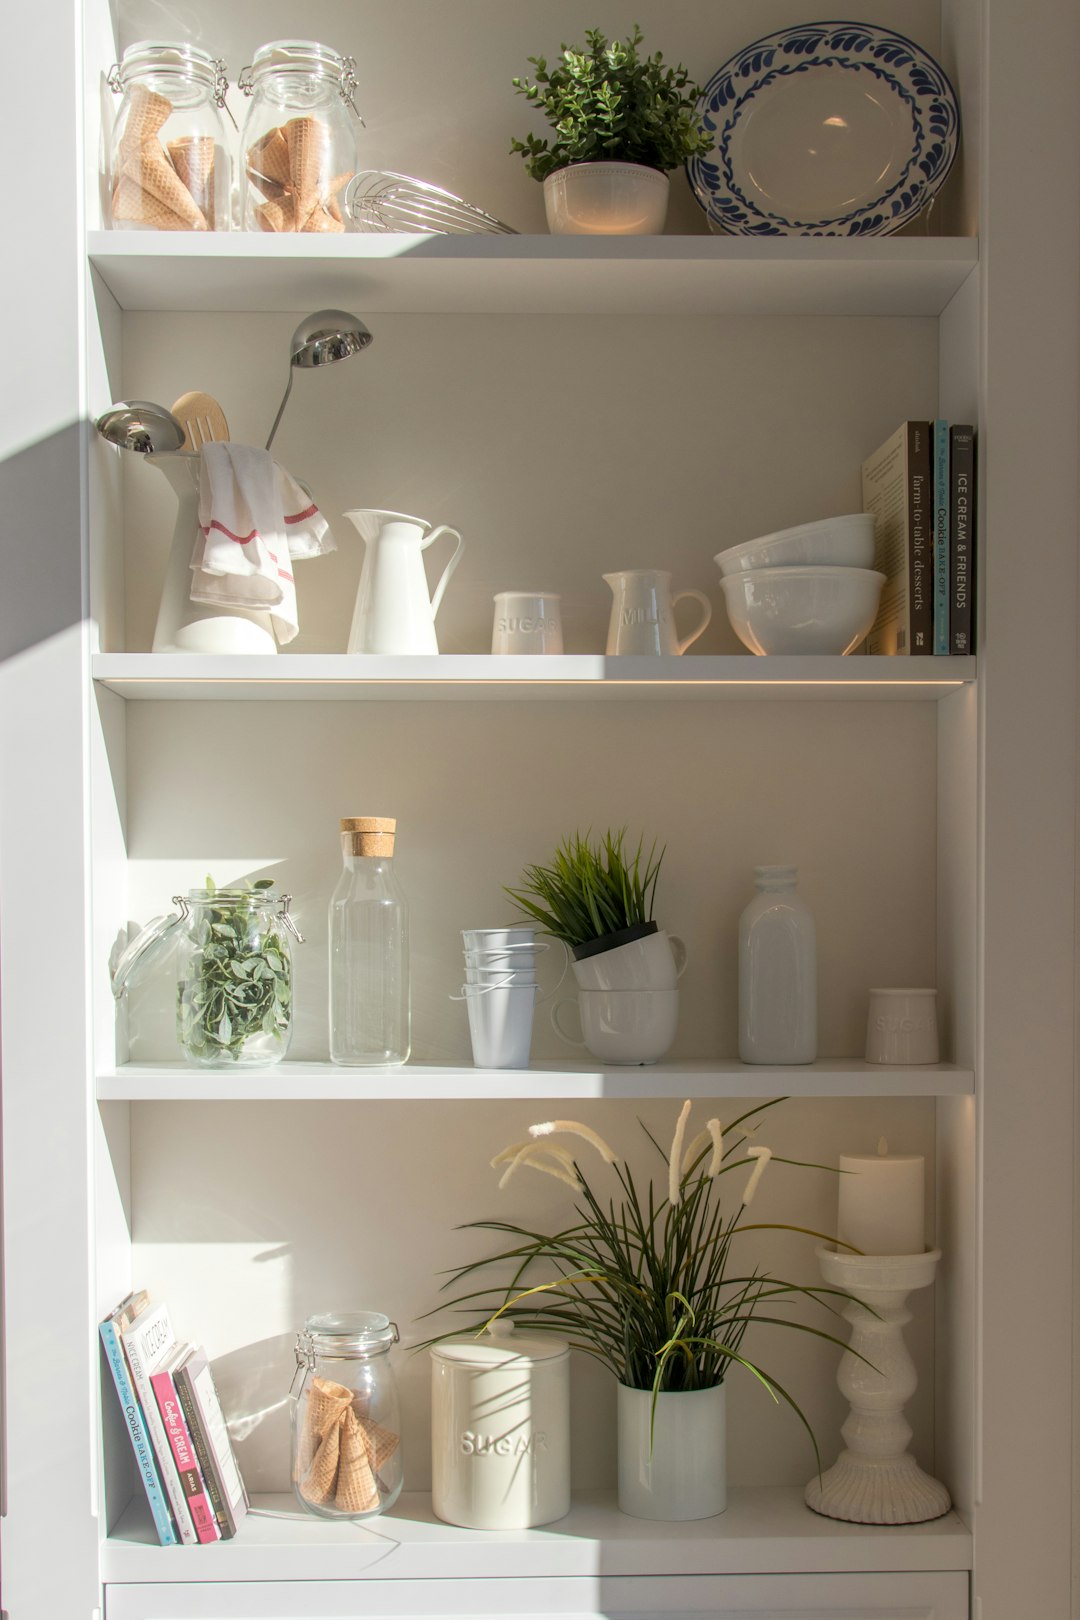 Effortless Ways to Keep Your Home Tidy and Organized